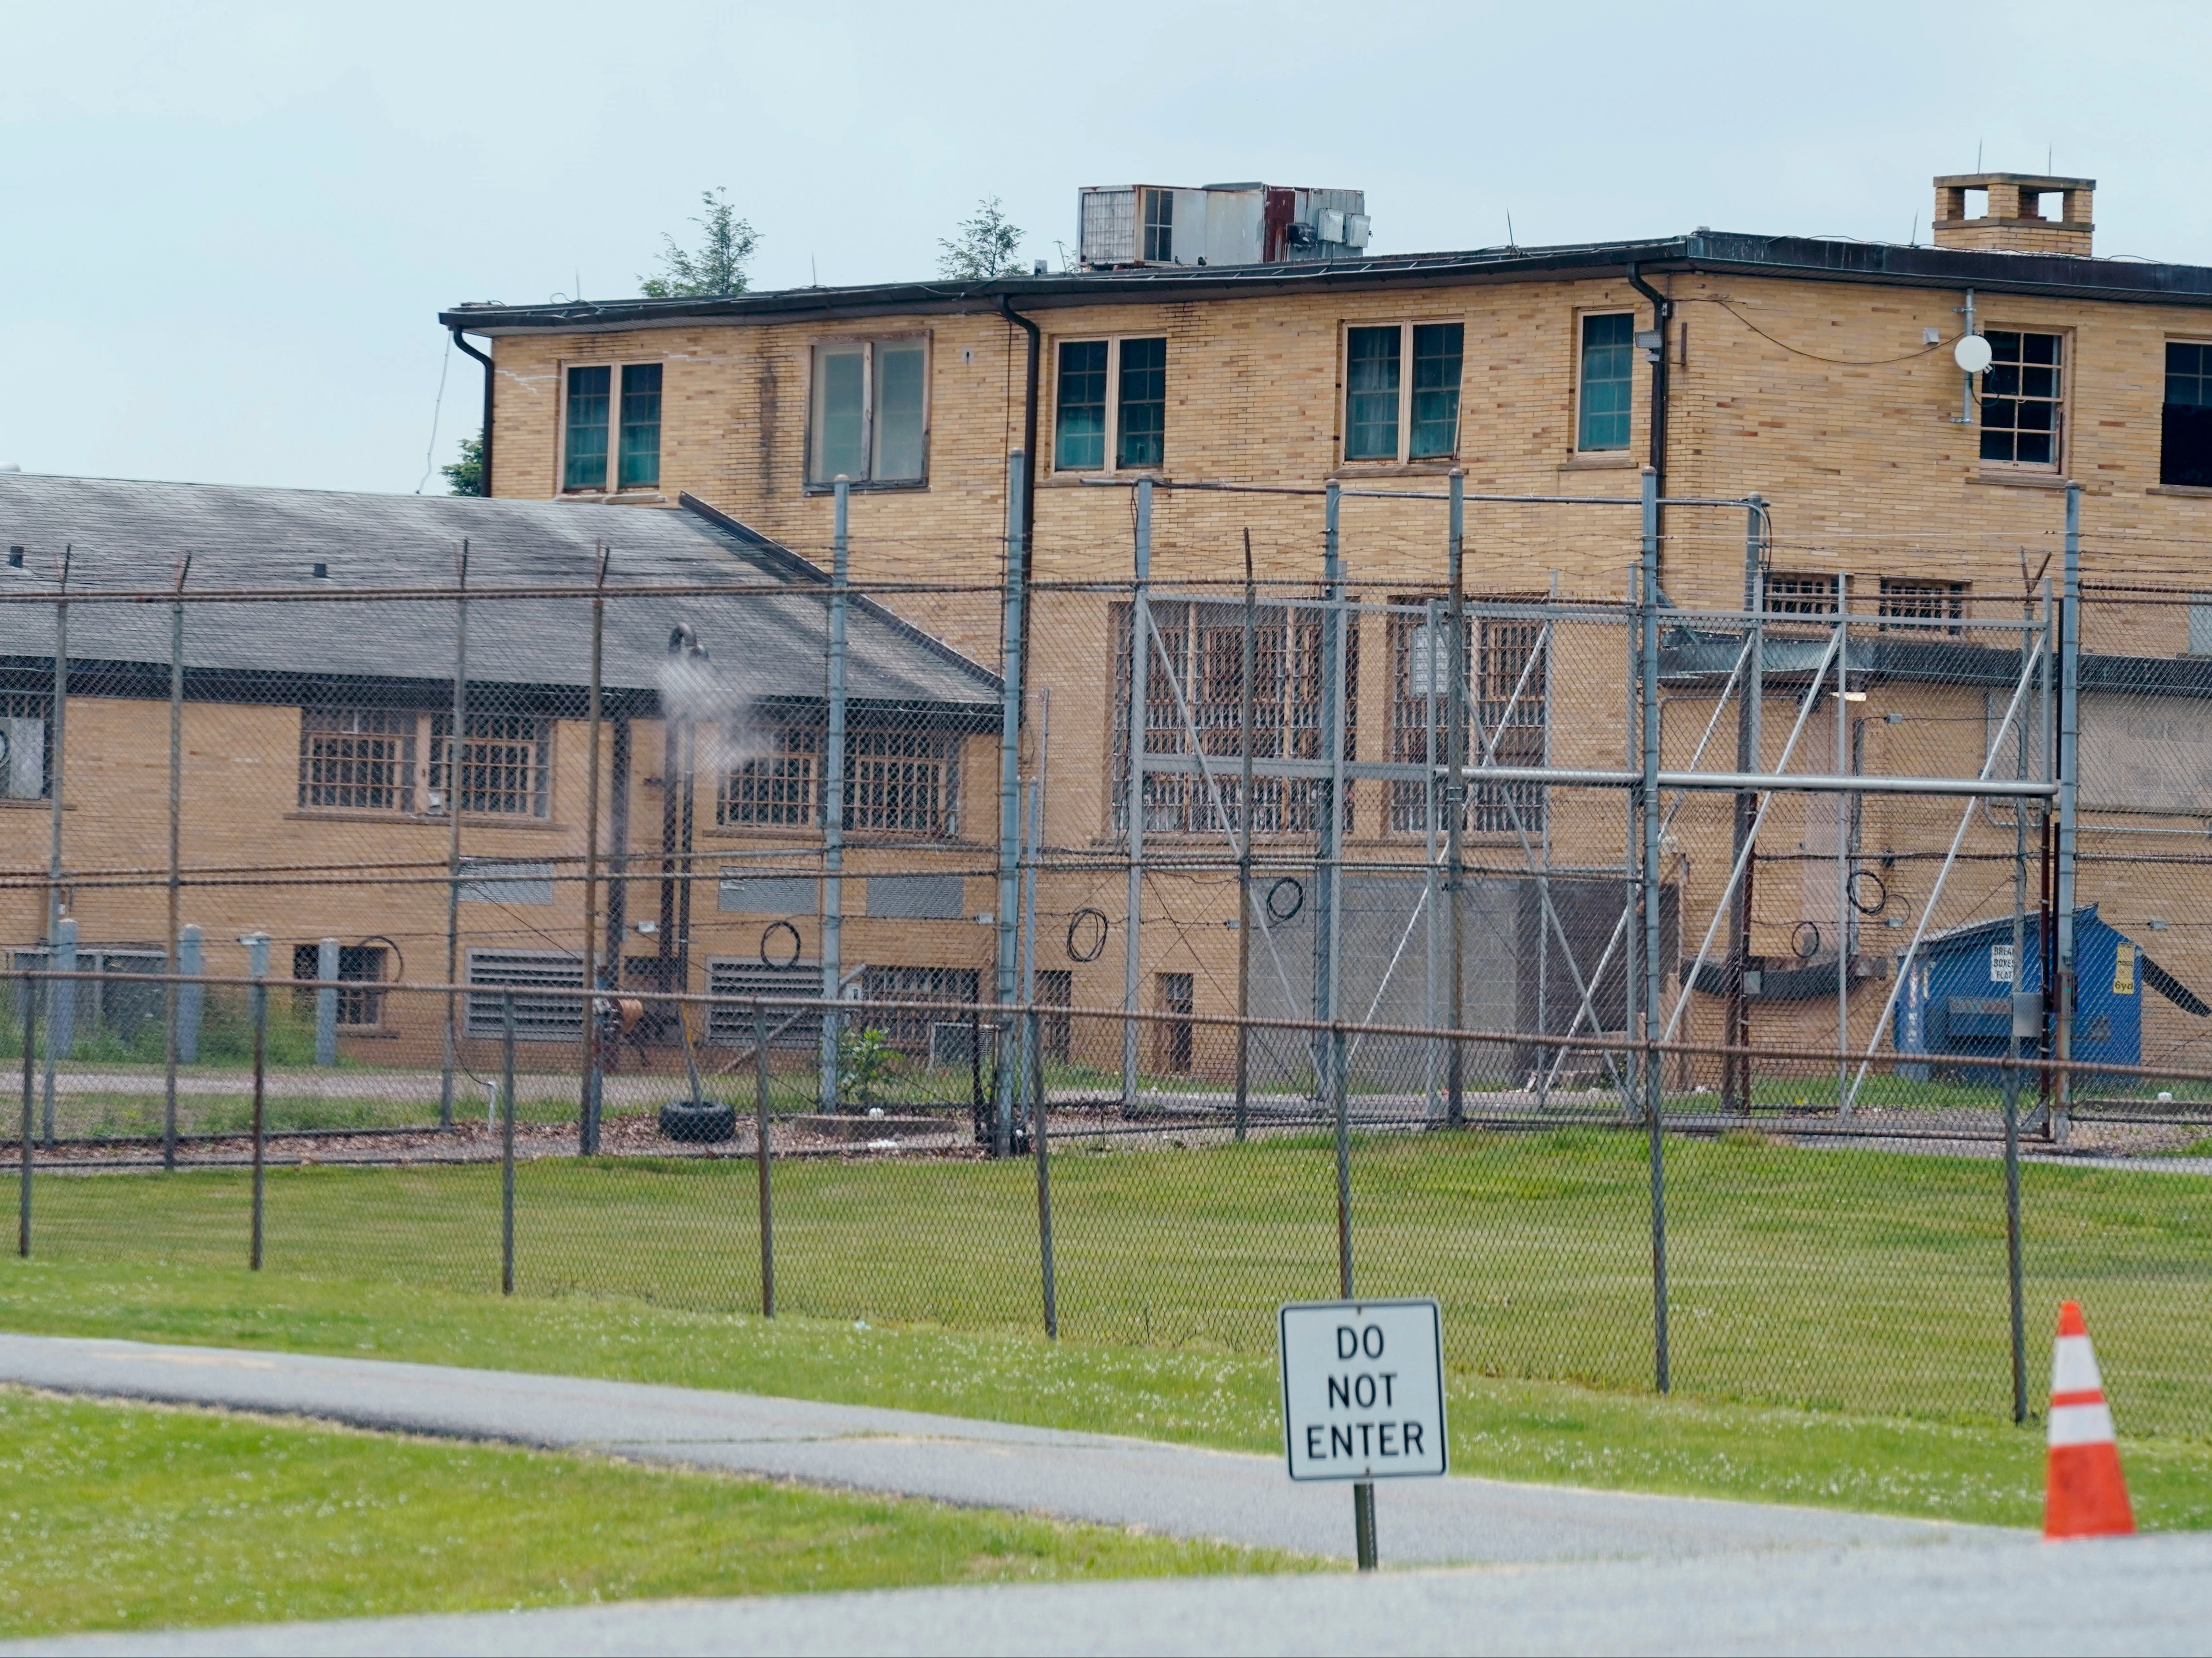 High fences surround buildings on the grounds of the Edna Mahan Correctional Facility for Women in Clinton, New Jersey